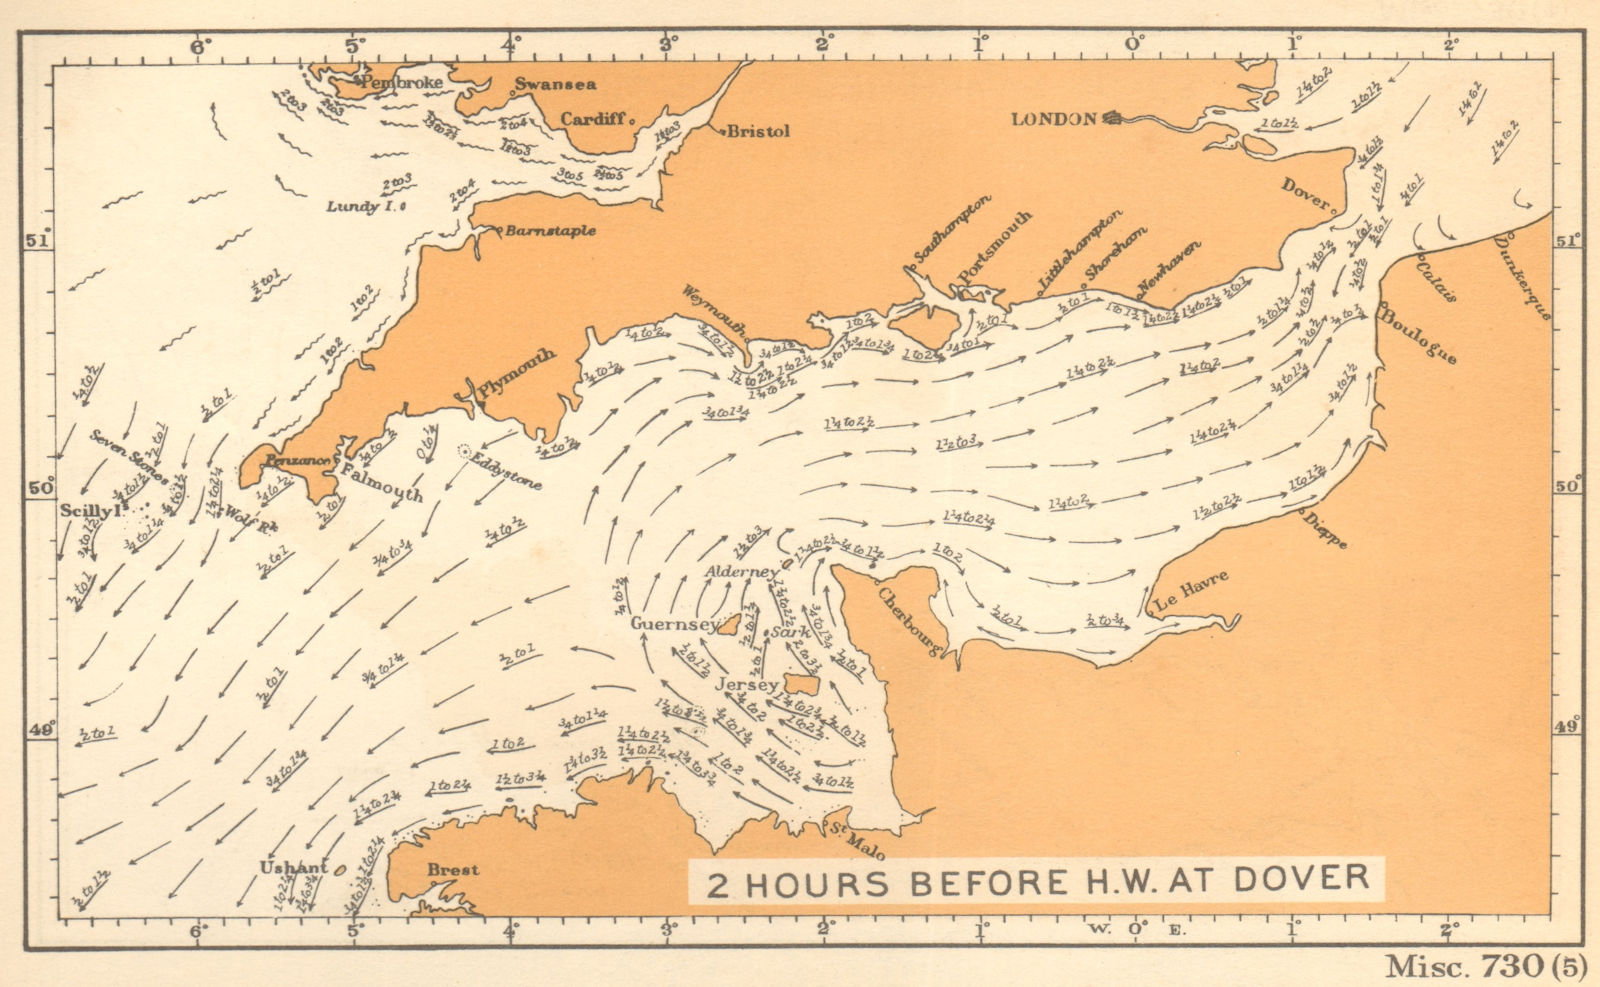 English Channel currents 2 hours before high water at Dover. ADMIRALTY 1943 map